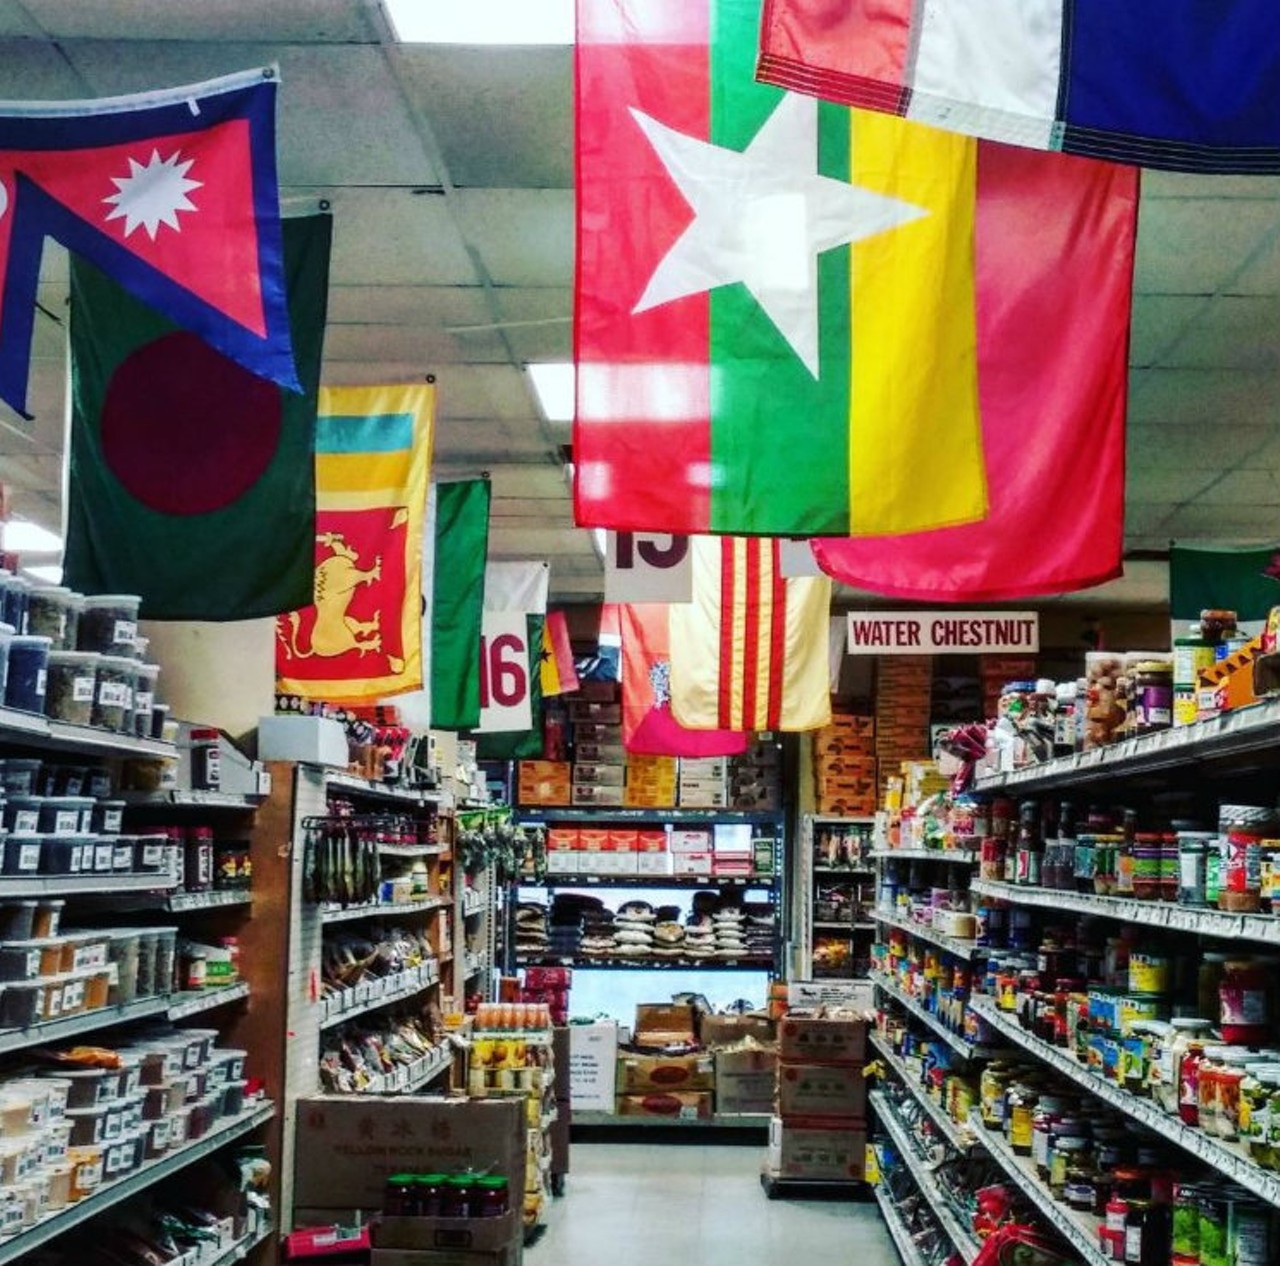 3. &#147;.... The preserves and spice aisles at Jay&#146;s International Food Company (3172 S. Grand Boulevard, 314-772-2552) are very peaceful happy places where you can find a weird food item to try.&#148; &#150; Chris Baricevic, founder of Big Muddy Records
Photo courtesy of Instagram / shawnawb.